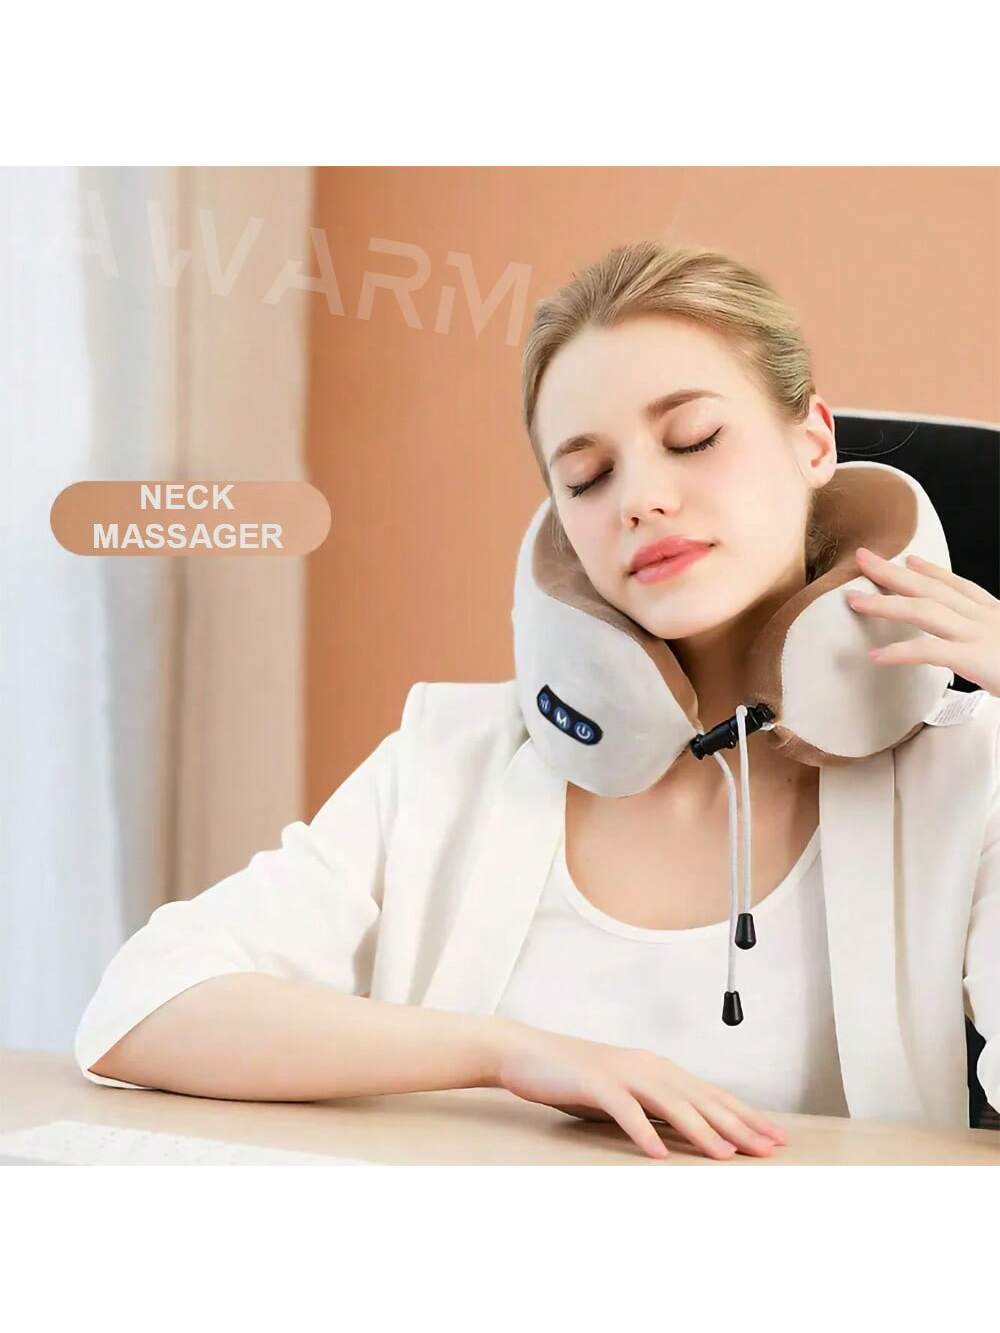 [TODAY'S SPECIAL PRICE]Electric Neck Massager, U-Shaped Massage Pillow Cervical And Neck Massager With Durable Memory Sponge, Massage Pillow With Heat, Deep Tissue Kneading For Relax Airplane Car Travel Office Home Gift-Coffee Brown-1